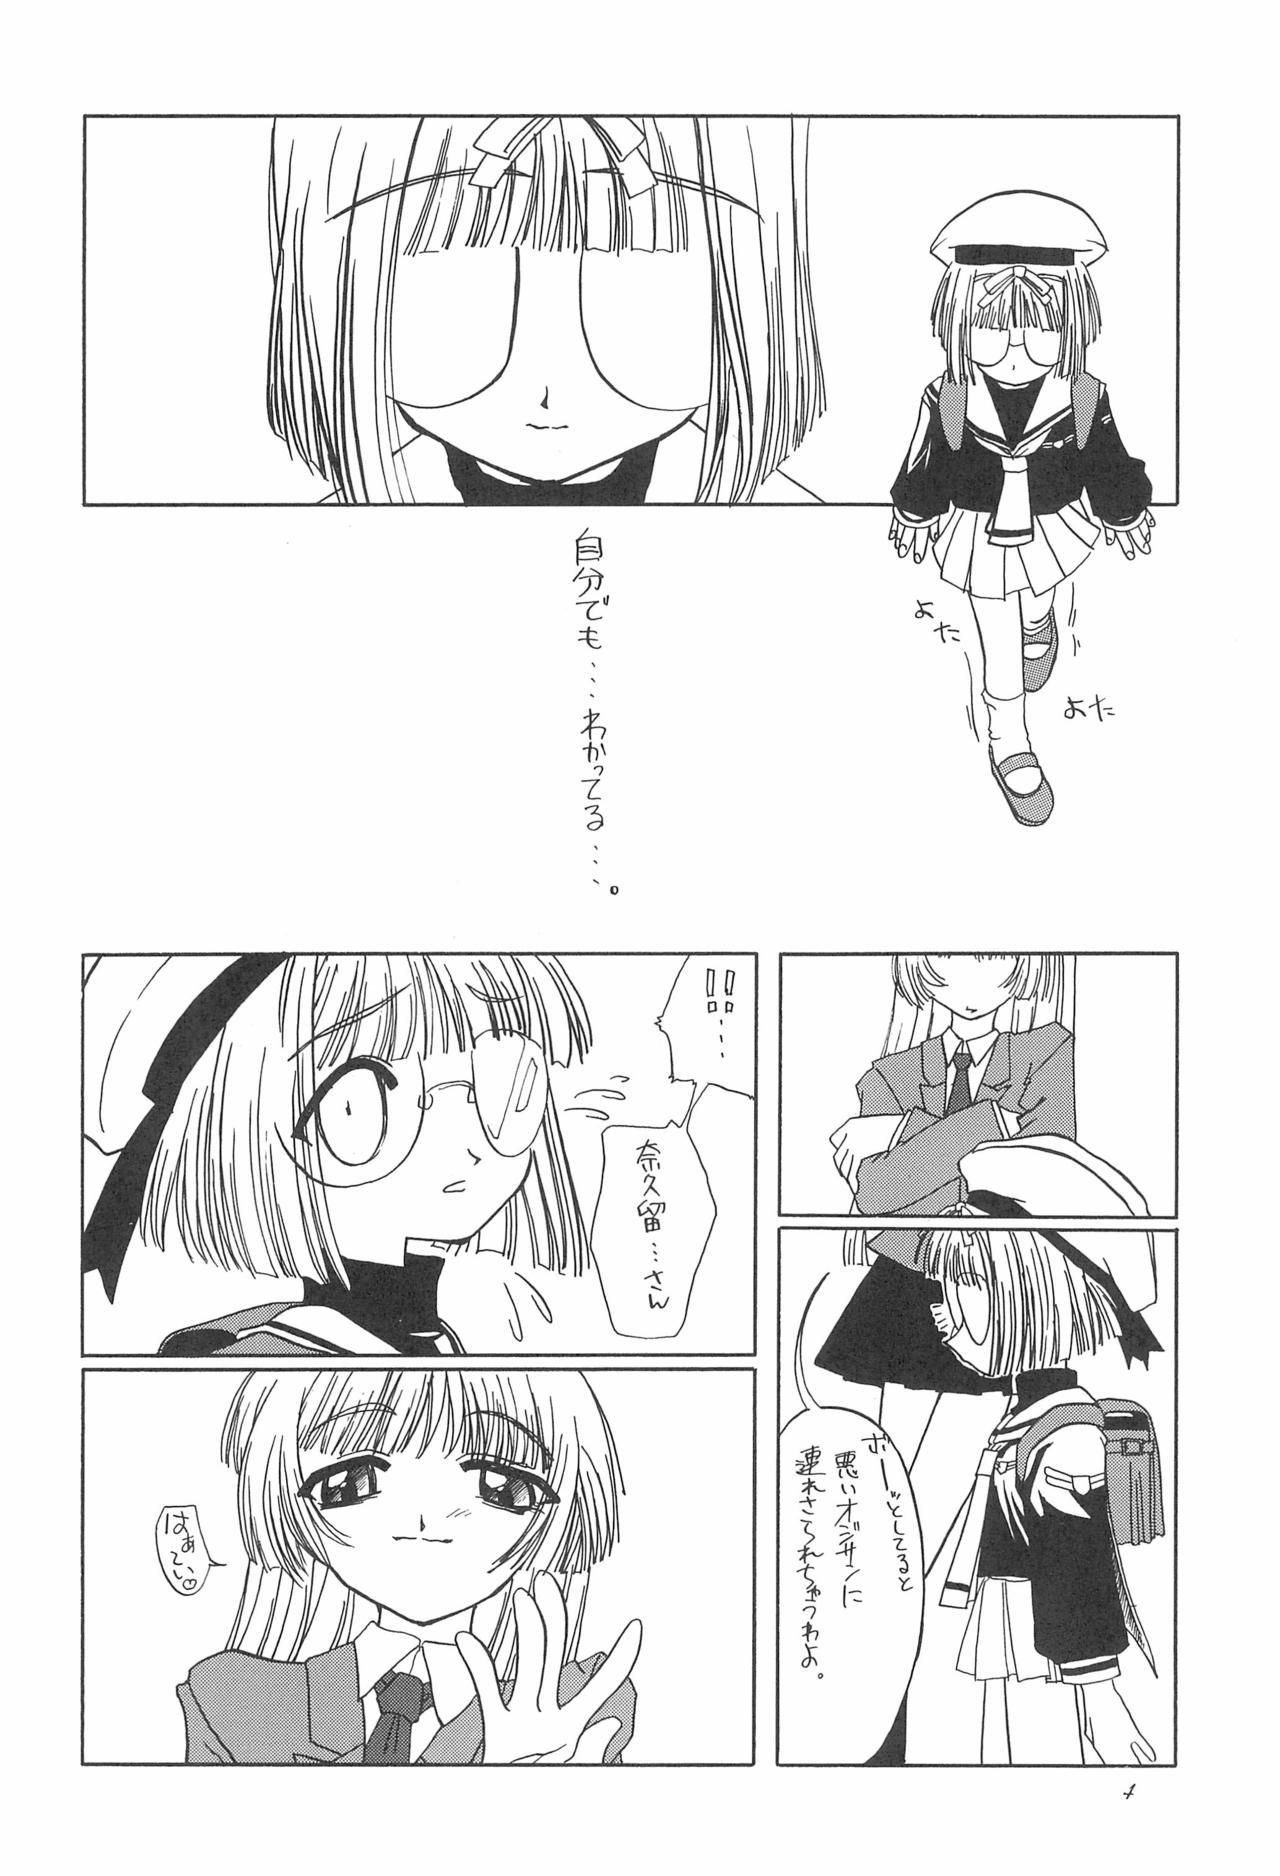 Pussyfucking 8th of ace - Cardcaptor sakura Stepmother - Page 8